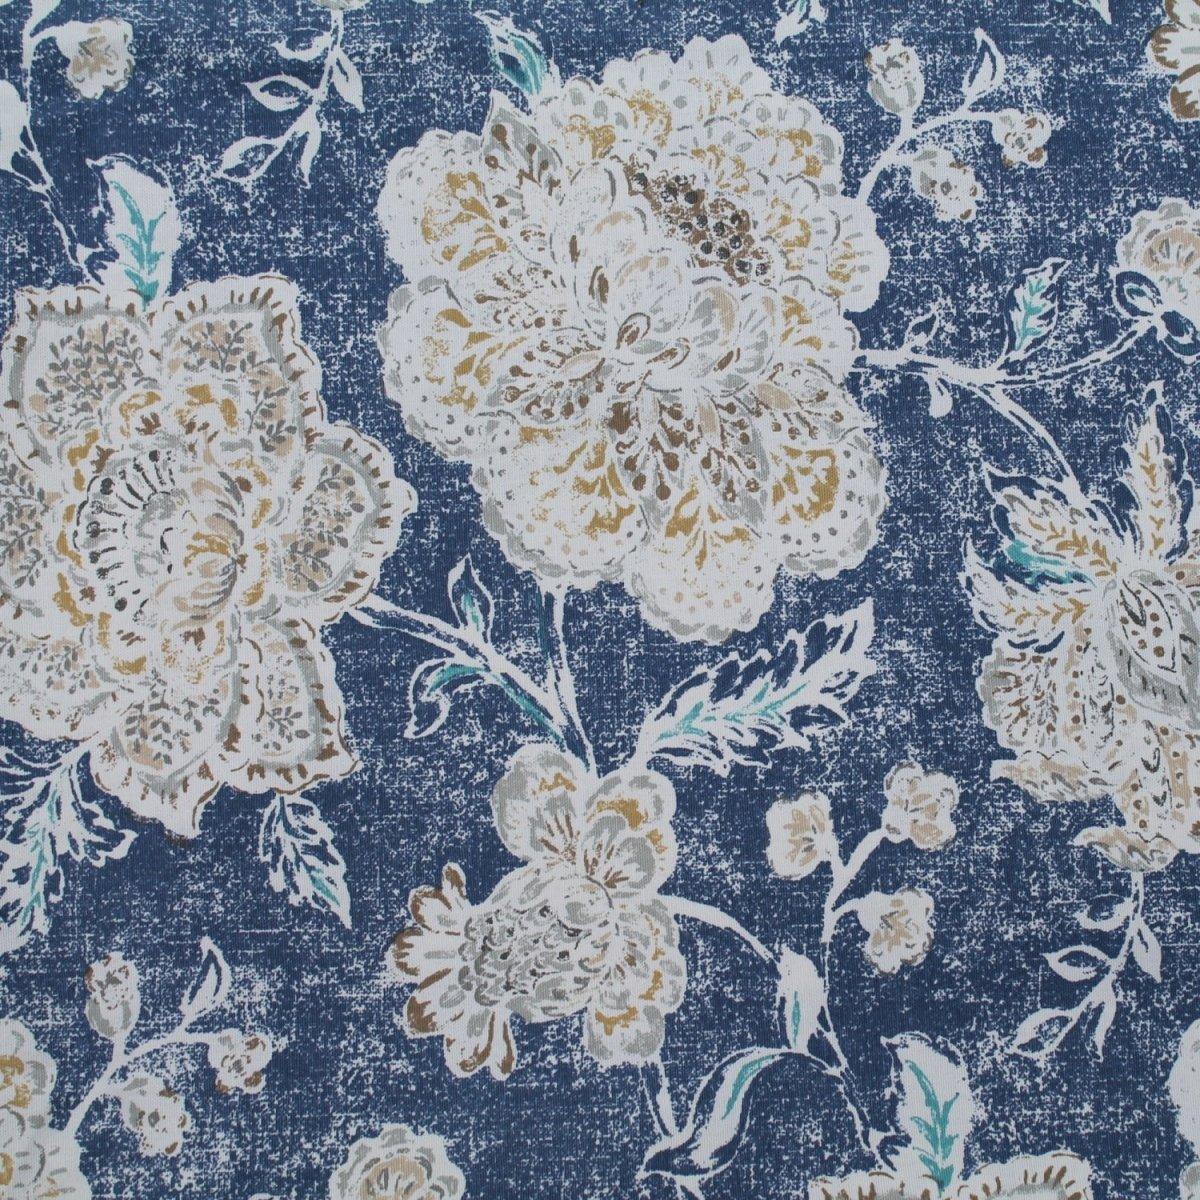 Faded floral décor fabric for cushions draperies.